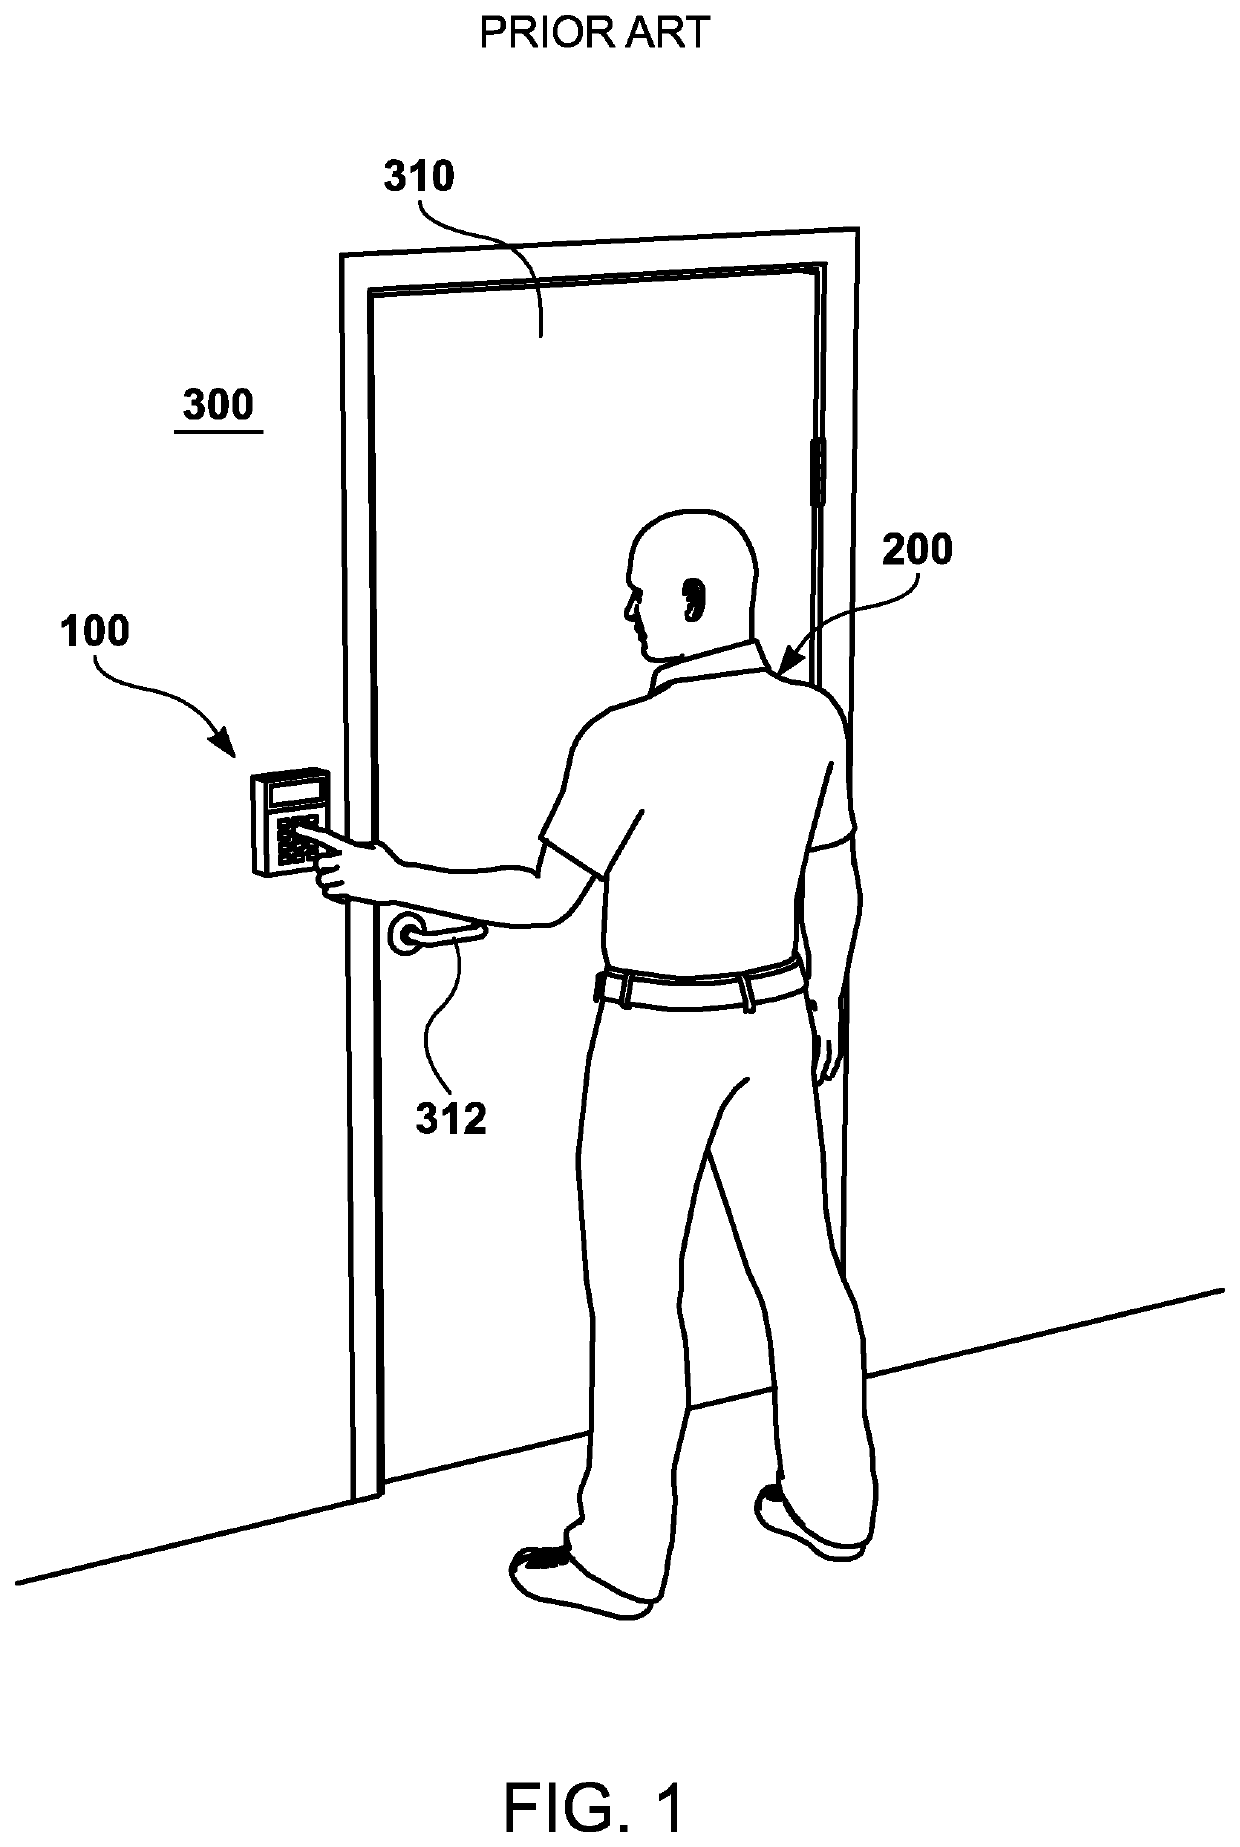 Anti-Tampering Switch for Electronic Access Control Readers